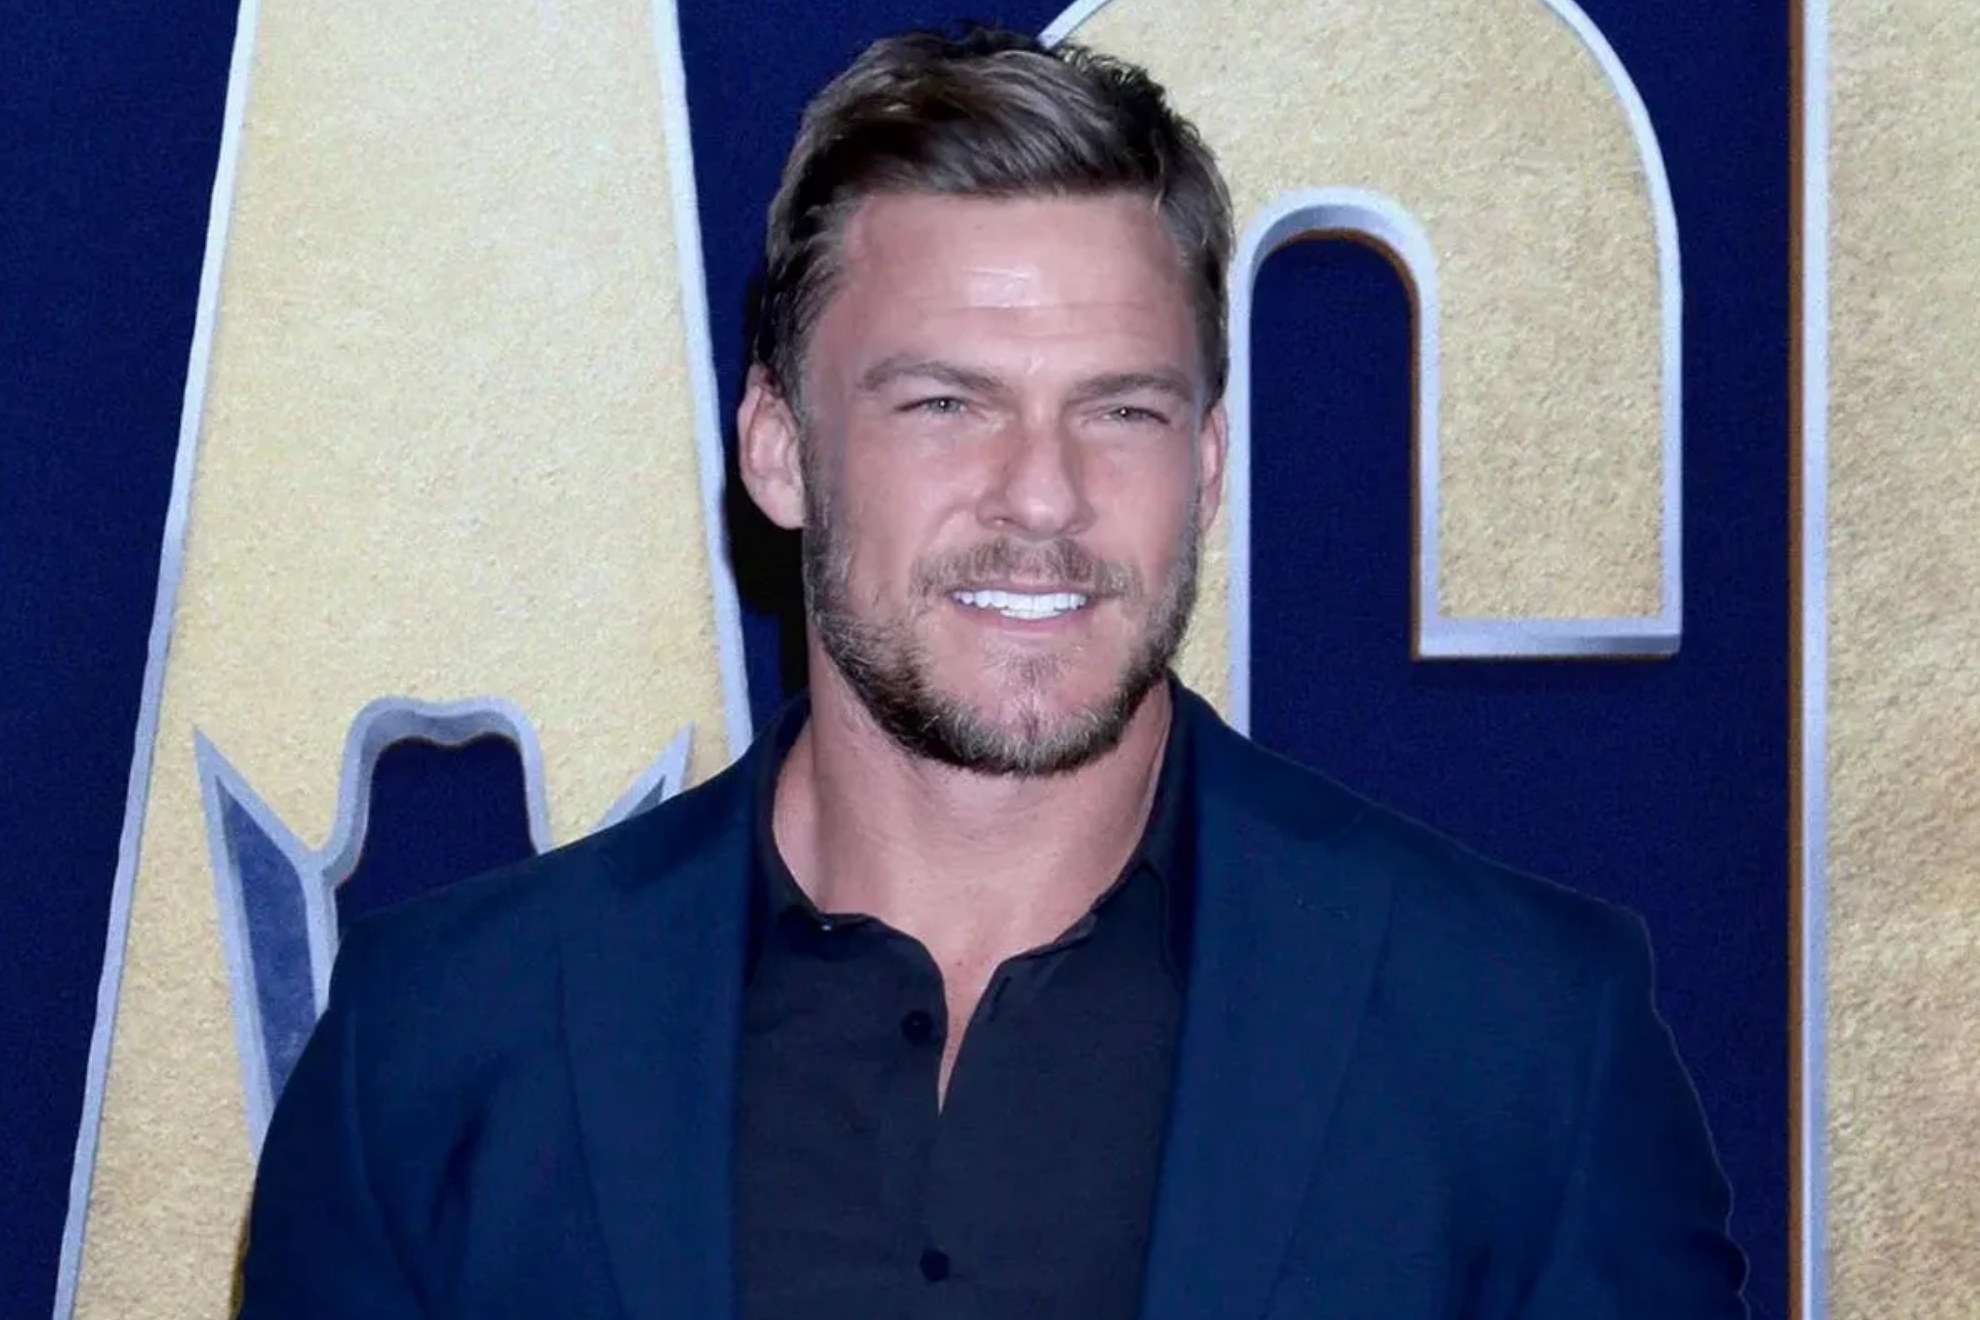 Reacher star Alan Ritchson confesses he tried to commit suicide: I hung myself